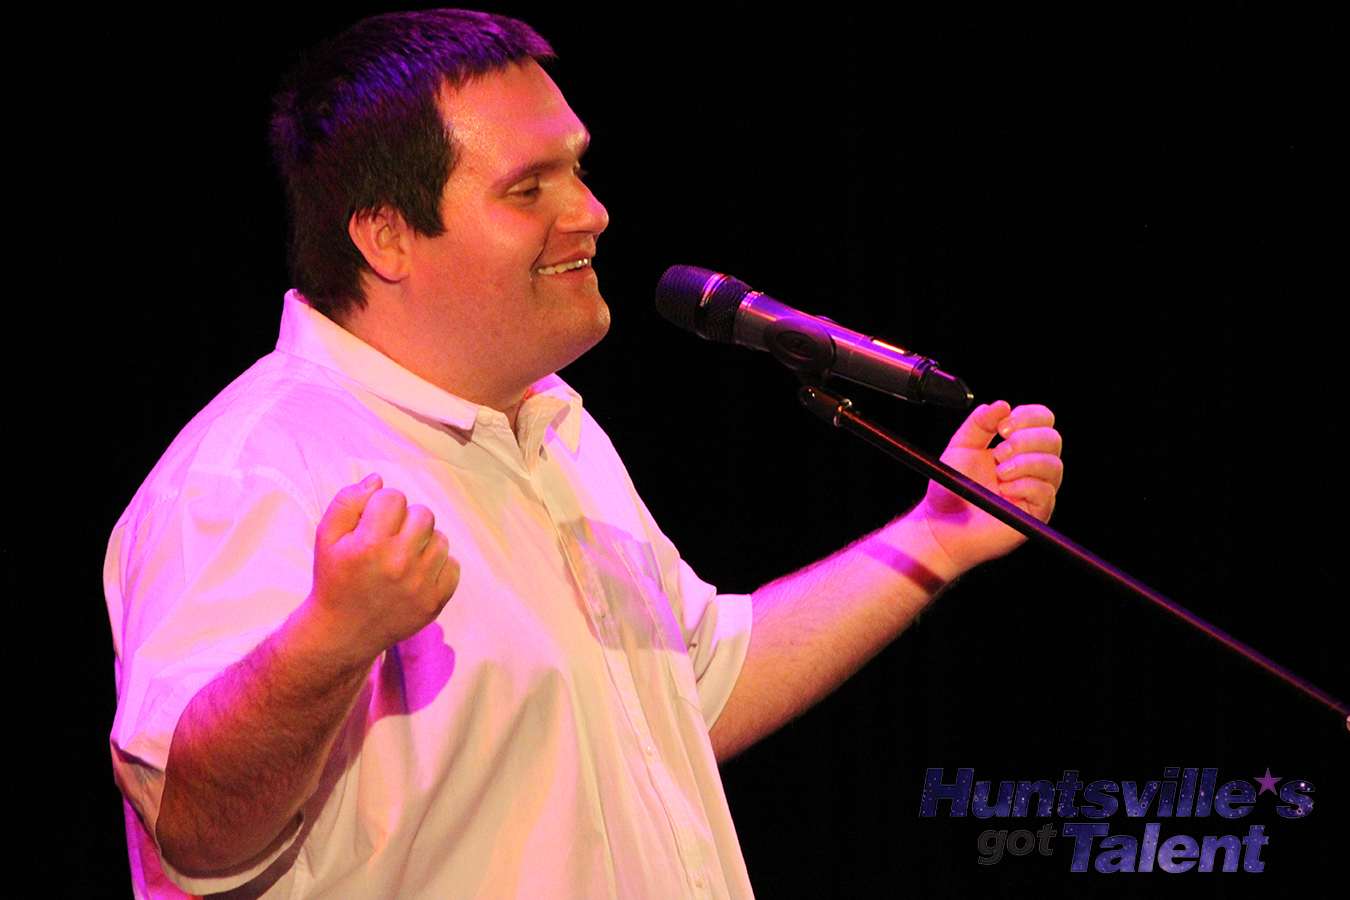 a young man in a white, collared shirt raises his hands with outstretched arms as he smiles and sings into a microphone